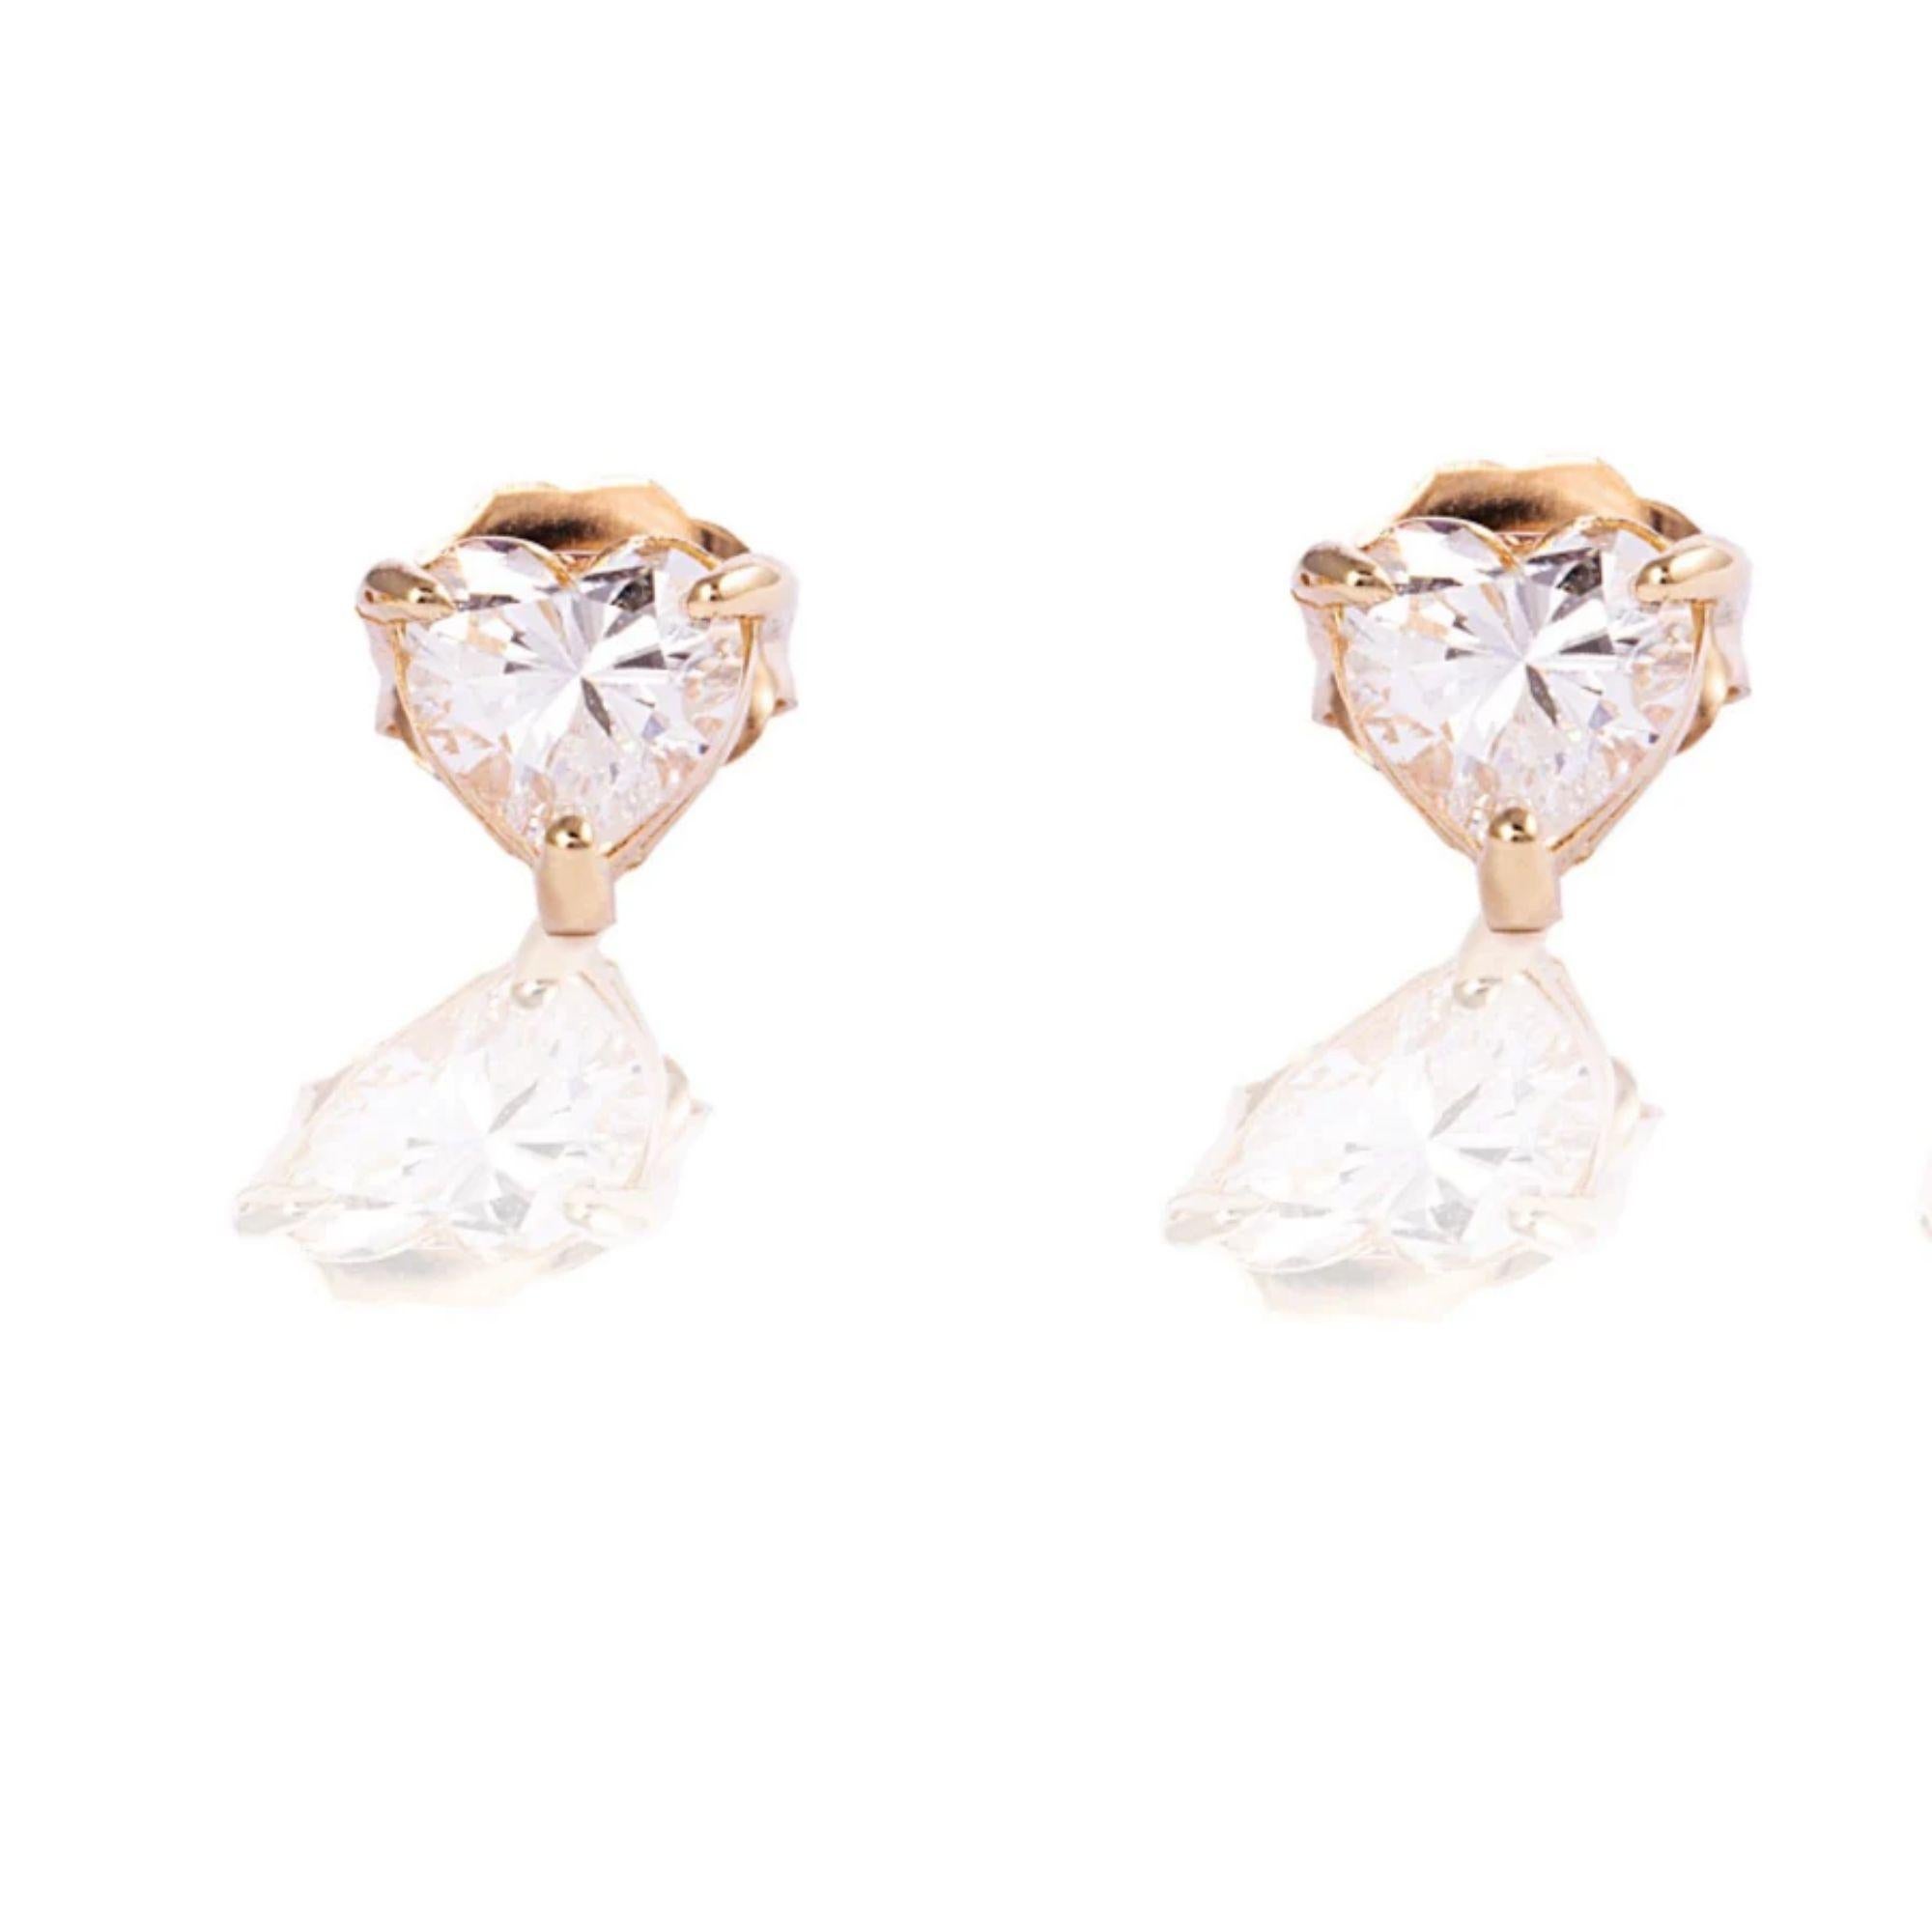 Dainty and dazzling, these unique heart shaped diamond stud earrings can’t be missed. Crafted in cool 14k yellow gold, each sparkling earring features a diamond in a prong-look setting. Radiant with 1 ct. t.w. of diamonds and a bright polished